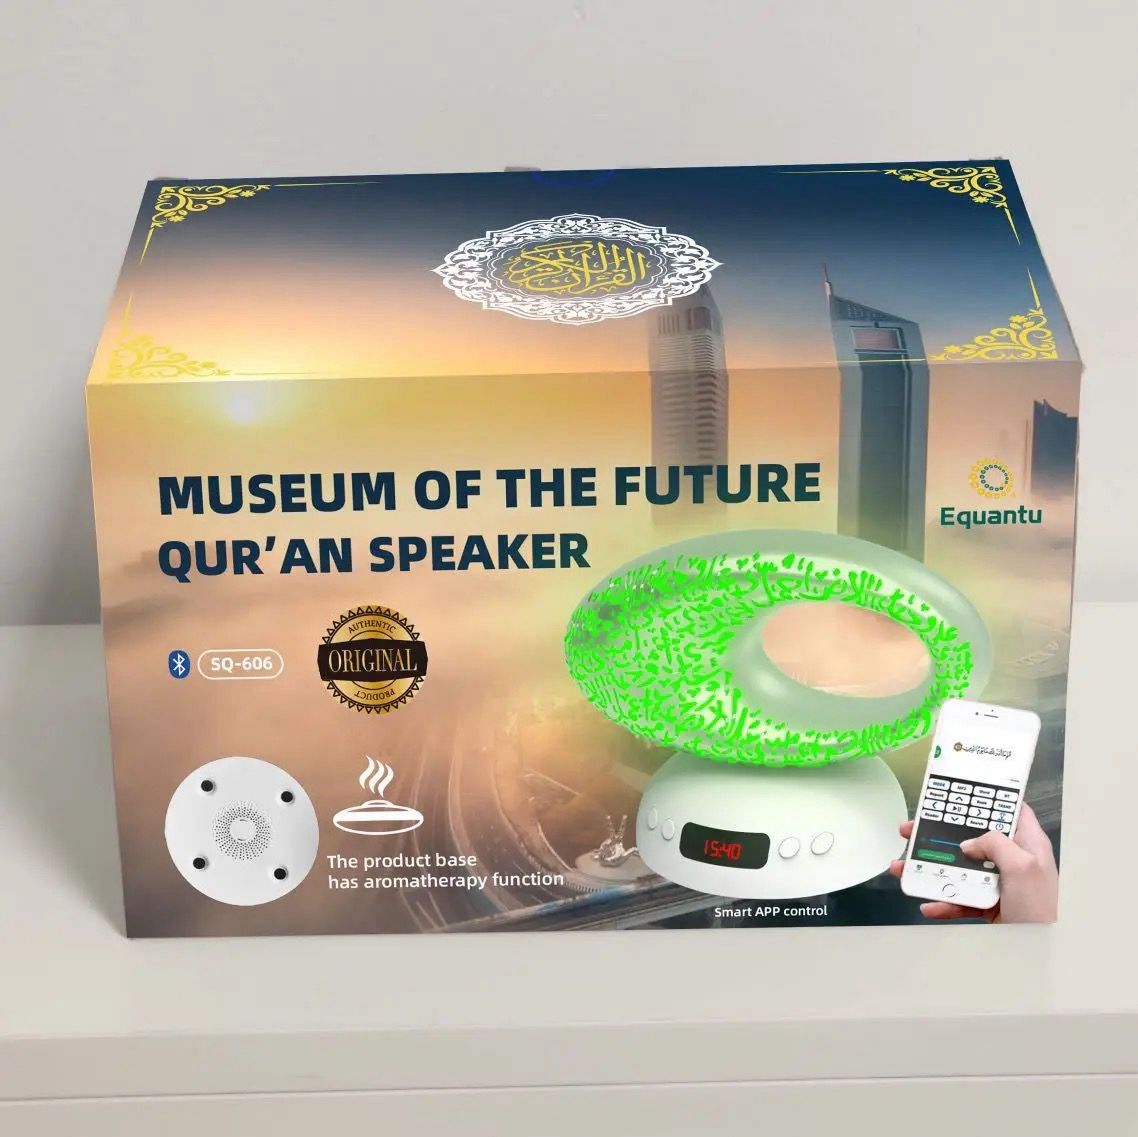 Equantu SQ-606 Qur'an Speaker Inspired by Museum of the Future Design, With Aromatherapy Function Plus 7 Changeable Colorful Lights